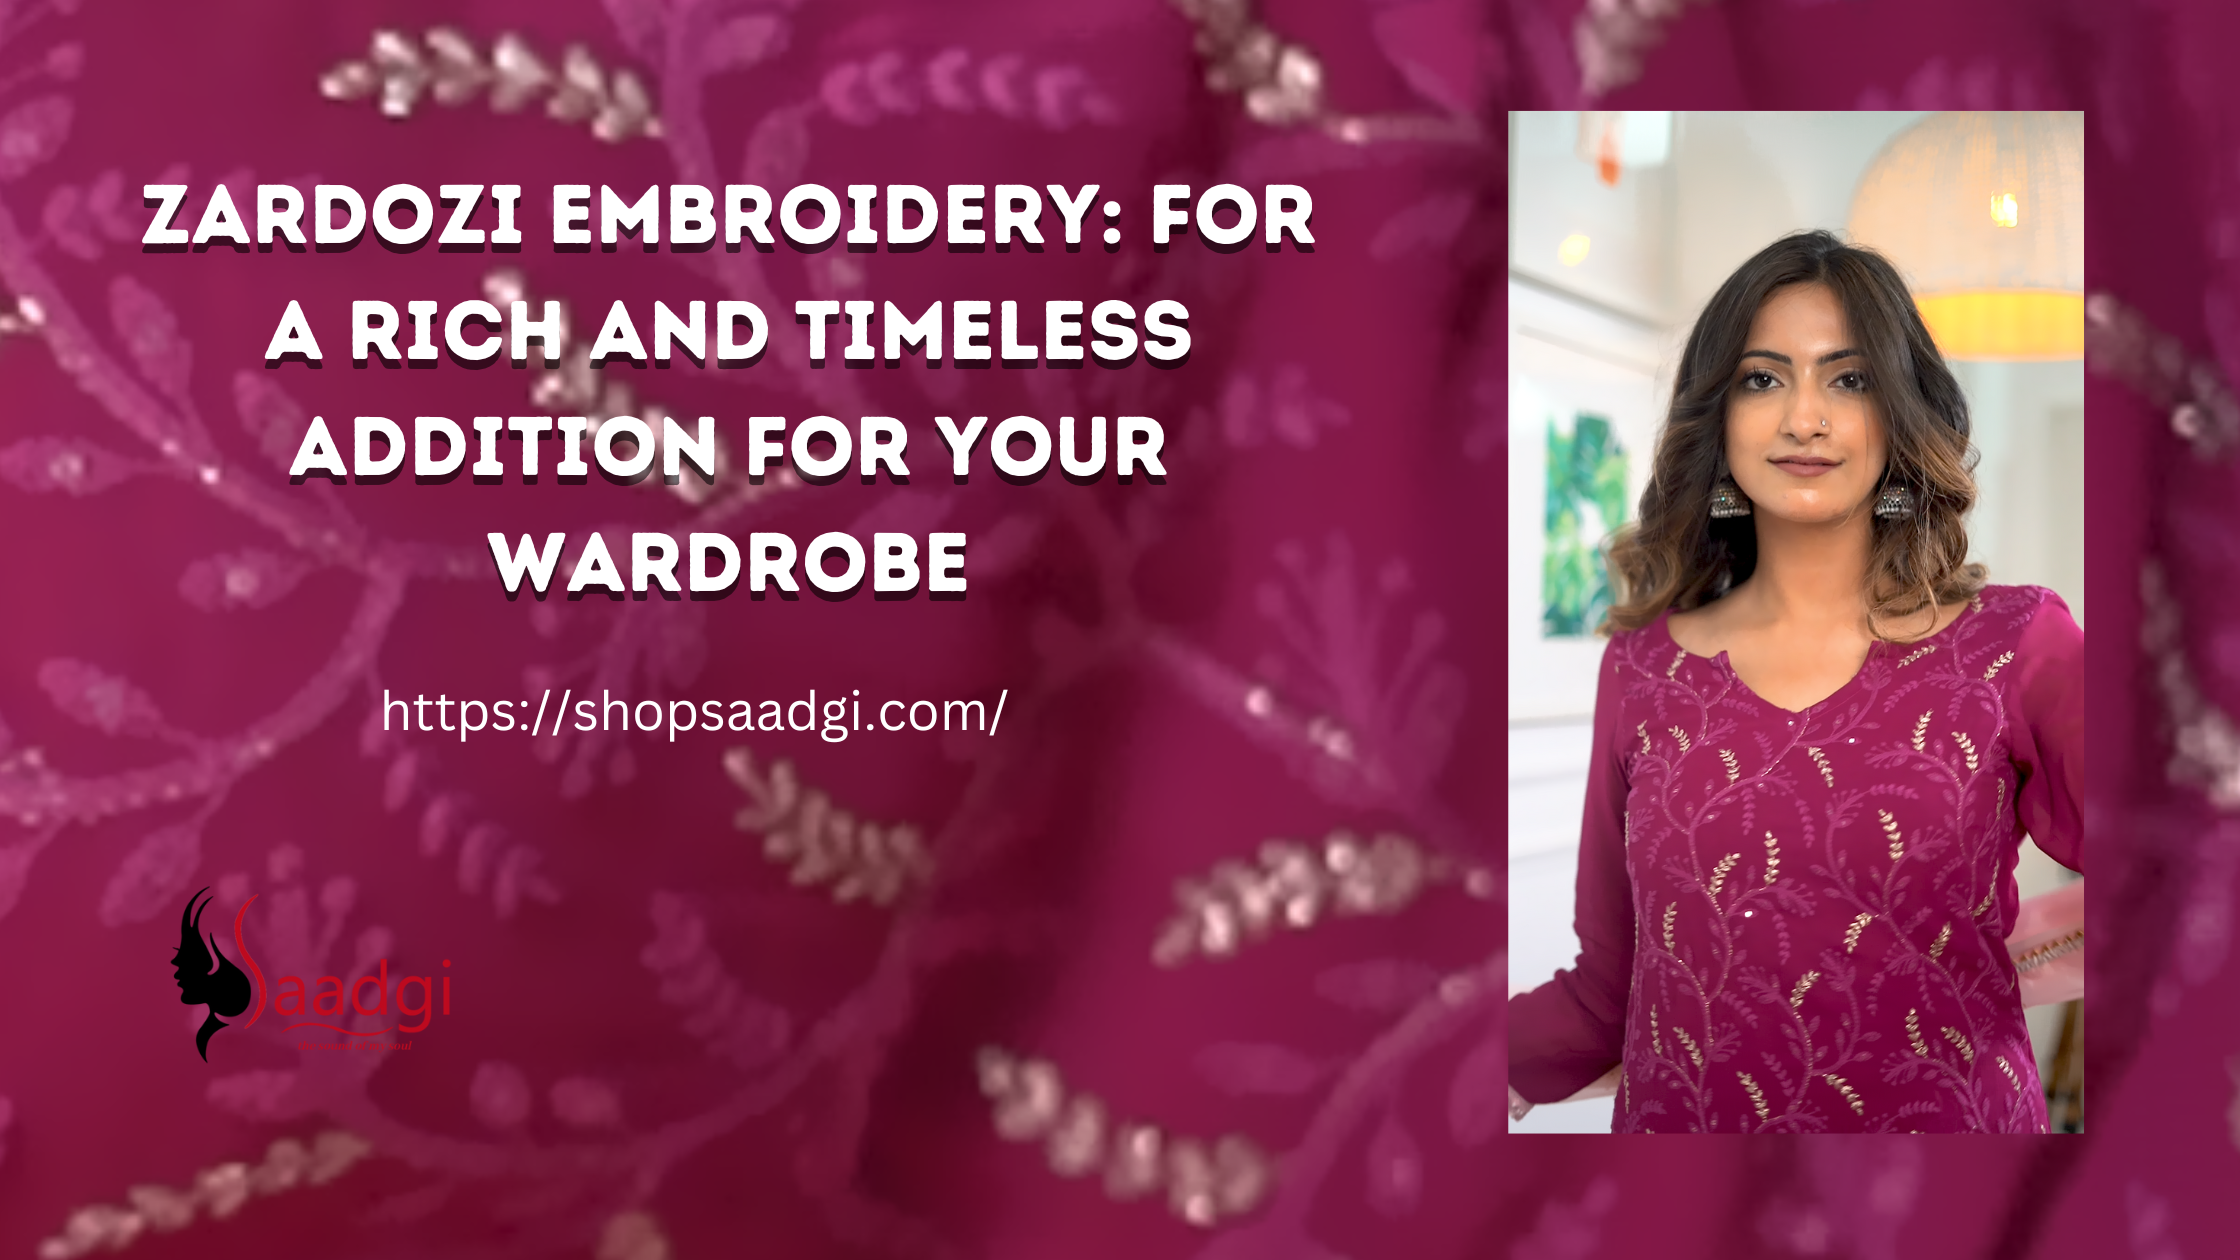 Zardozi embroidery: For a rich and timeless addition for your wardrobe